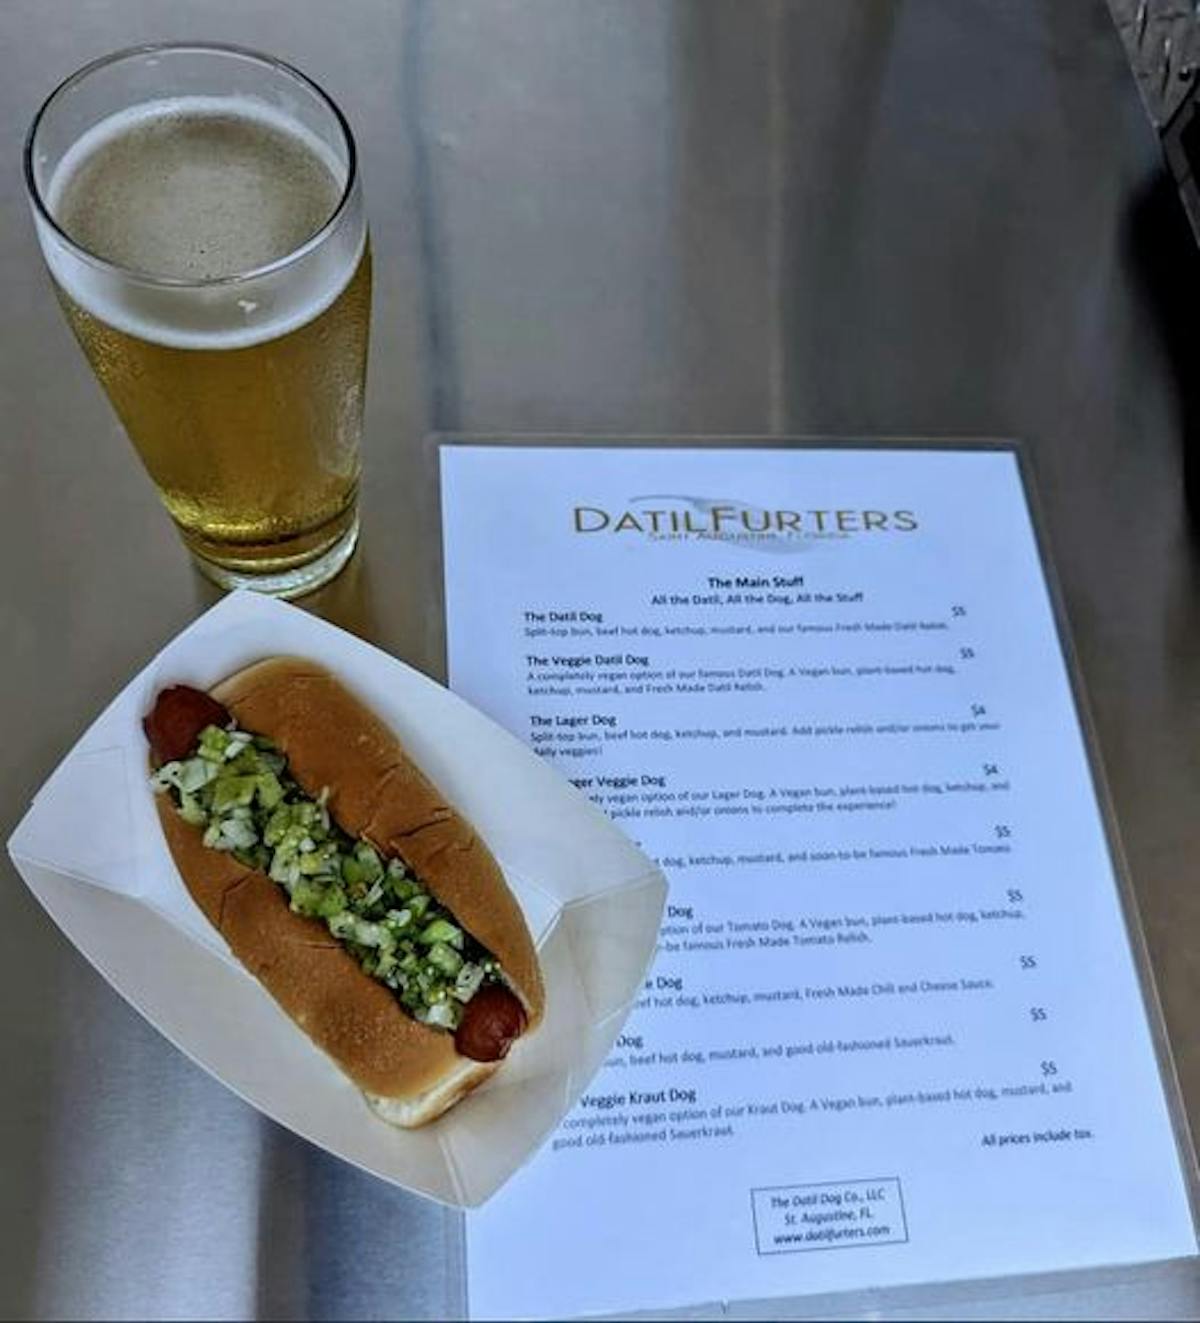 a hot dog next to a glass of beer on a table